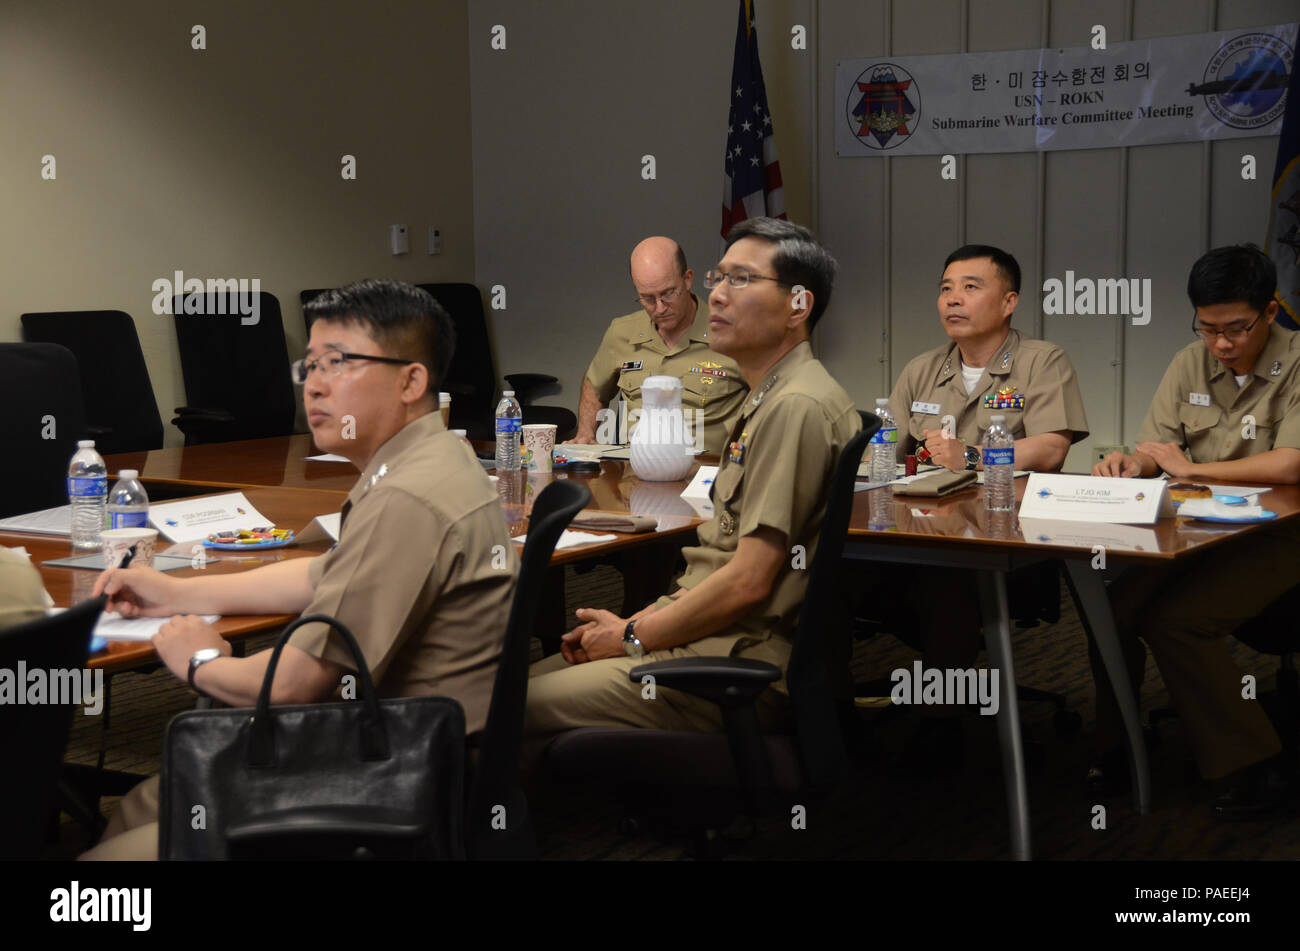 160331-N-YM720-253 SANTA RITA, Guam (March 31, 2016) Rear Adm. William Merz, commander, Submarine Group 7, left center, and Rear Adm. Youn Jeong Sang, commander, Submarine Force, Republic of Korea Navy (ROKN), right center, lead other members of the U.S. and ROKN submarine forces during the 43rd Submarine Warfare Committee Meeting (SWCM). SWCM is a bilateral discussion between the U.S. and ROKN submarine forces designed to foster the partnership and focuses on submarine tactics, force integraton and future submarine development. (U.S. Navy photo by MC3 Allen McNair/Released) Stock Photo